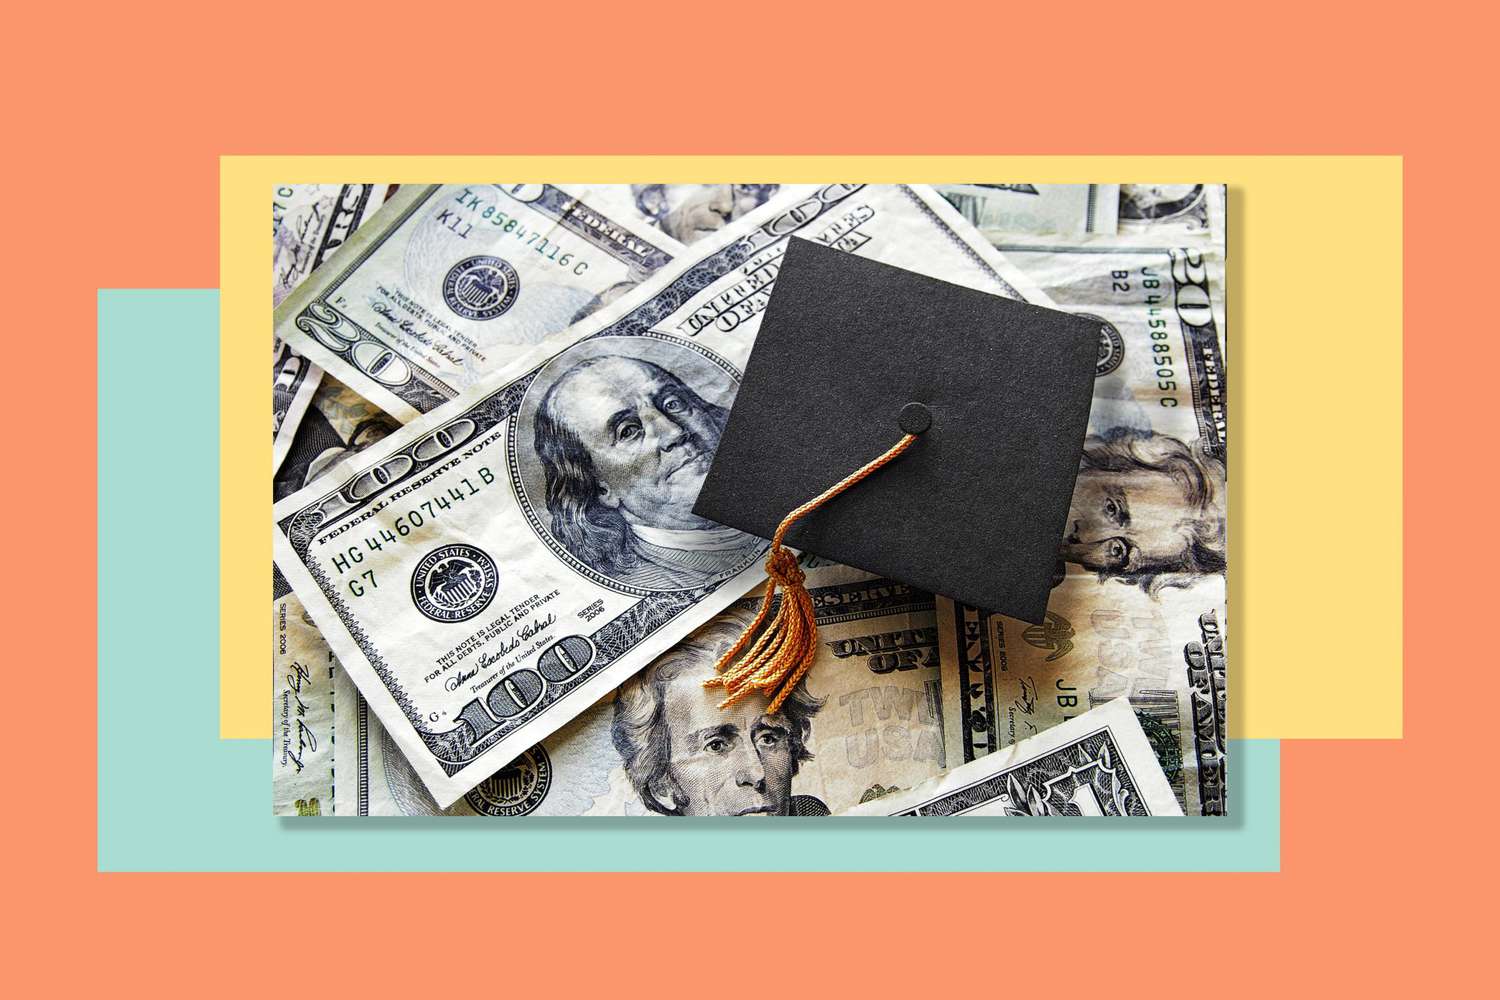 An image of a graduation cap on top of money.